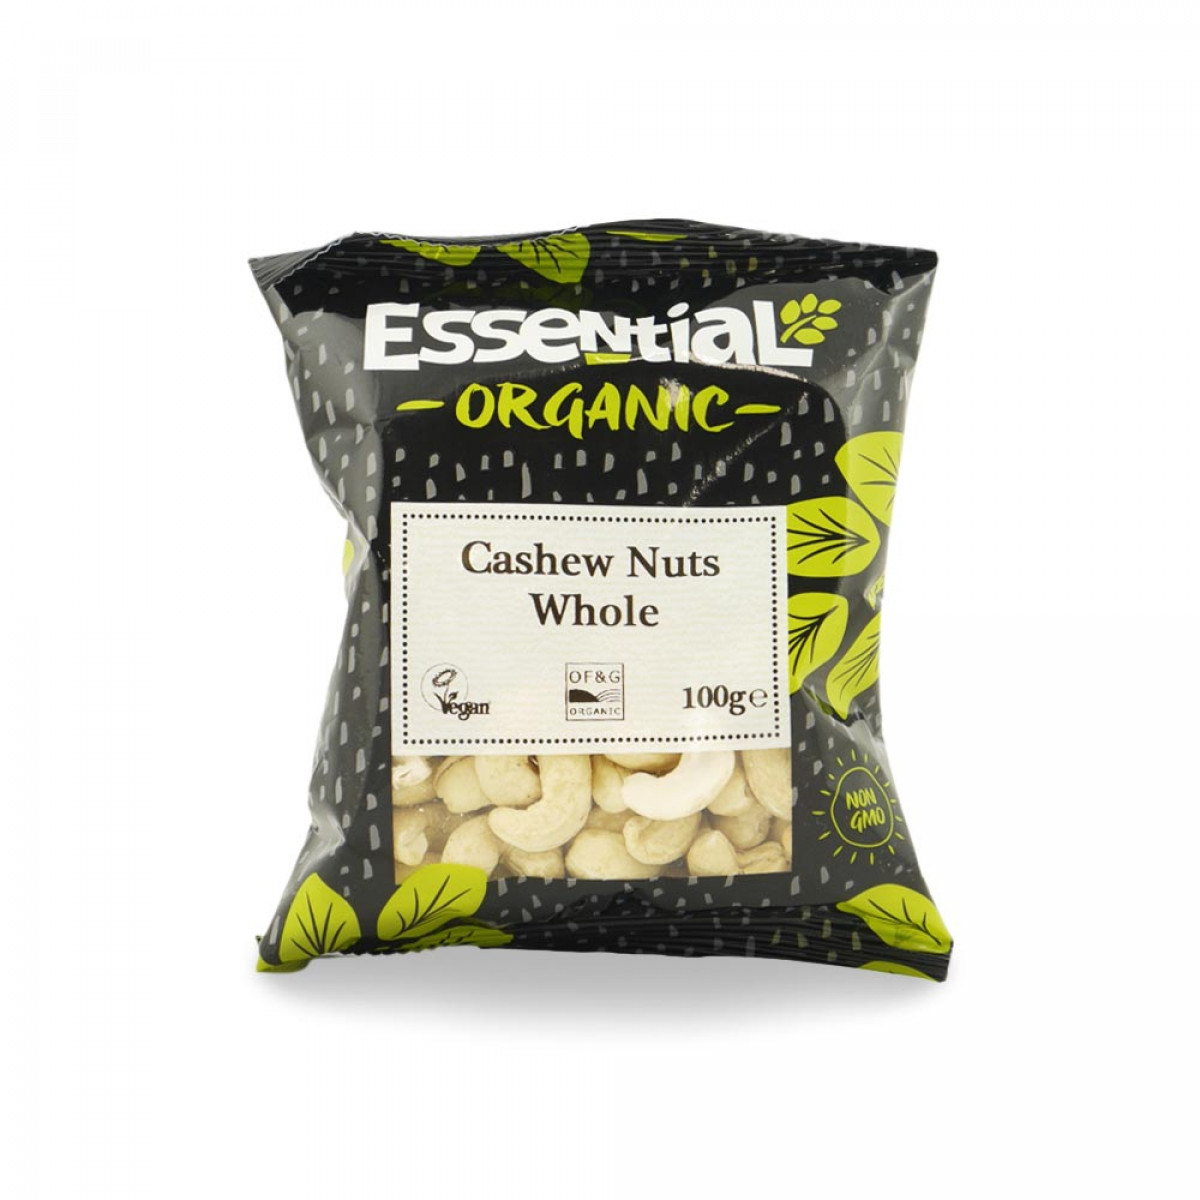 Product picture for Cashews - Whole